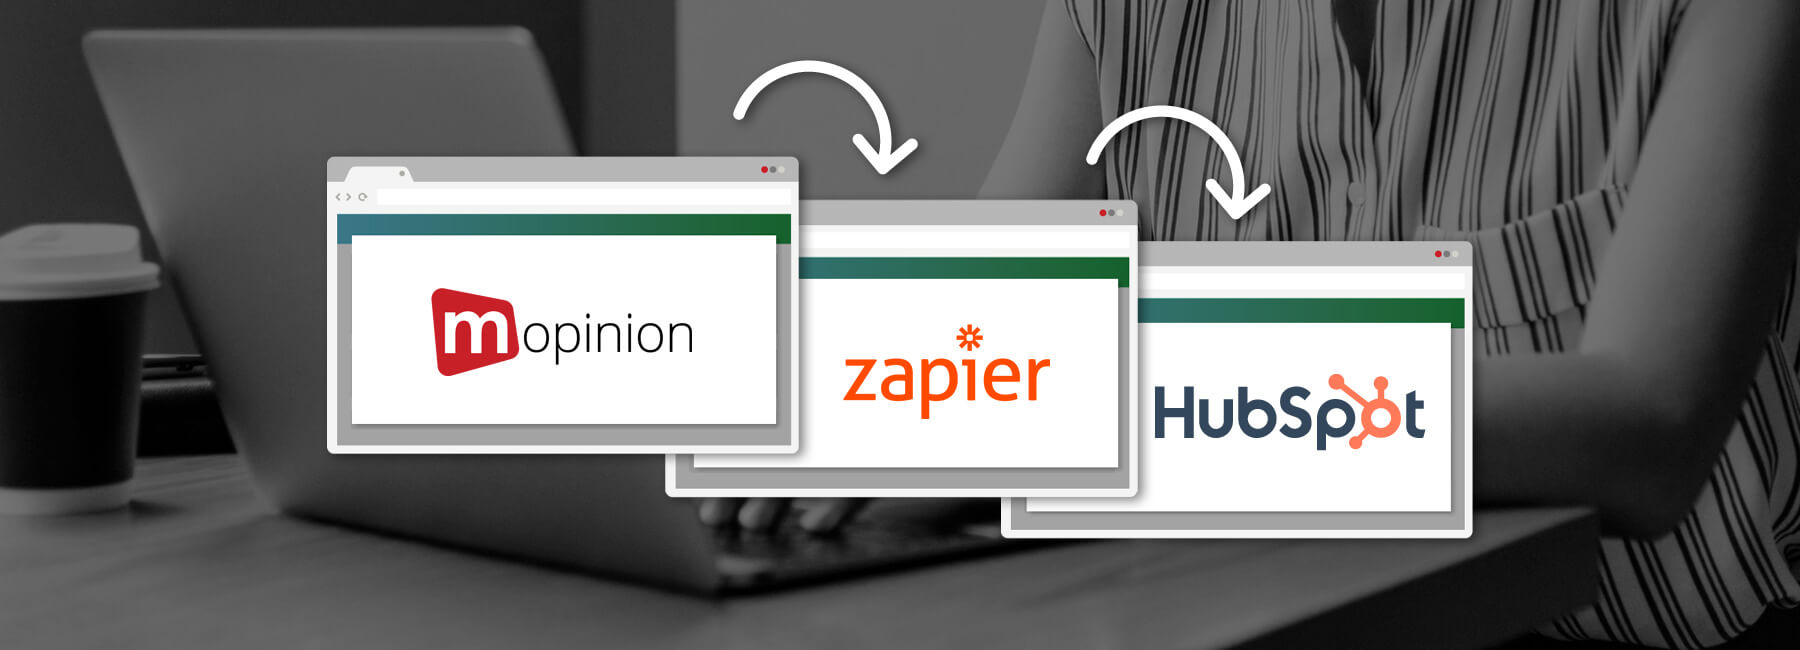 Integrate Mopinion with HubSpot CRM using Zapier